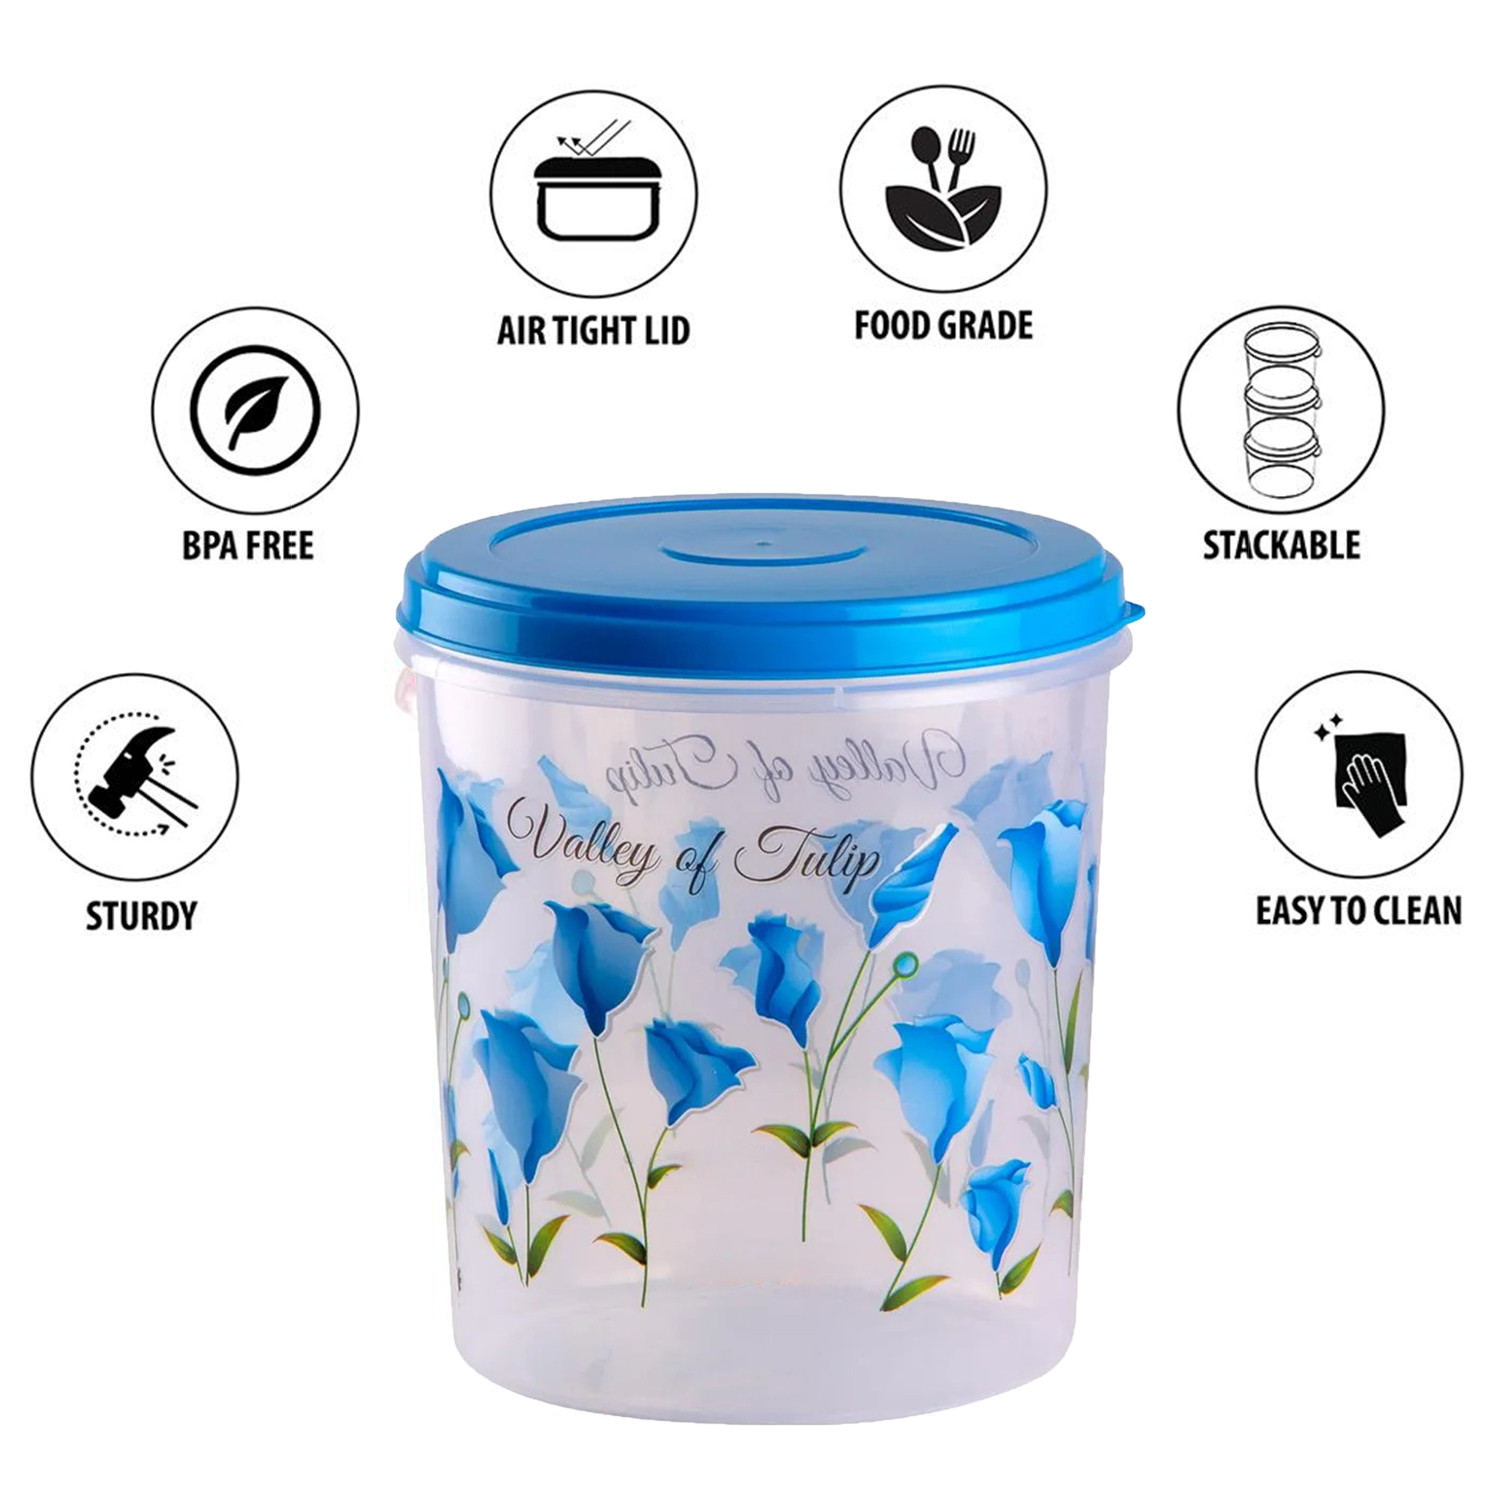 Kuber Industries Plastic Container|Container For Kitchen Storage Set|Air Tight Container|Tulip Printed 5 Litre,7 Litre,10 Litre Containers|Set of 3 (Sky Blue)